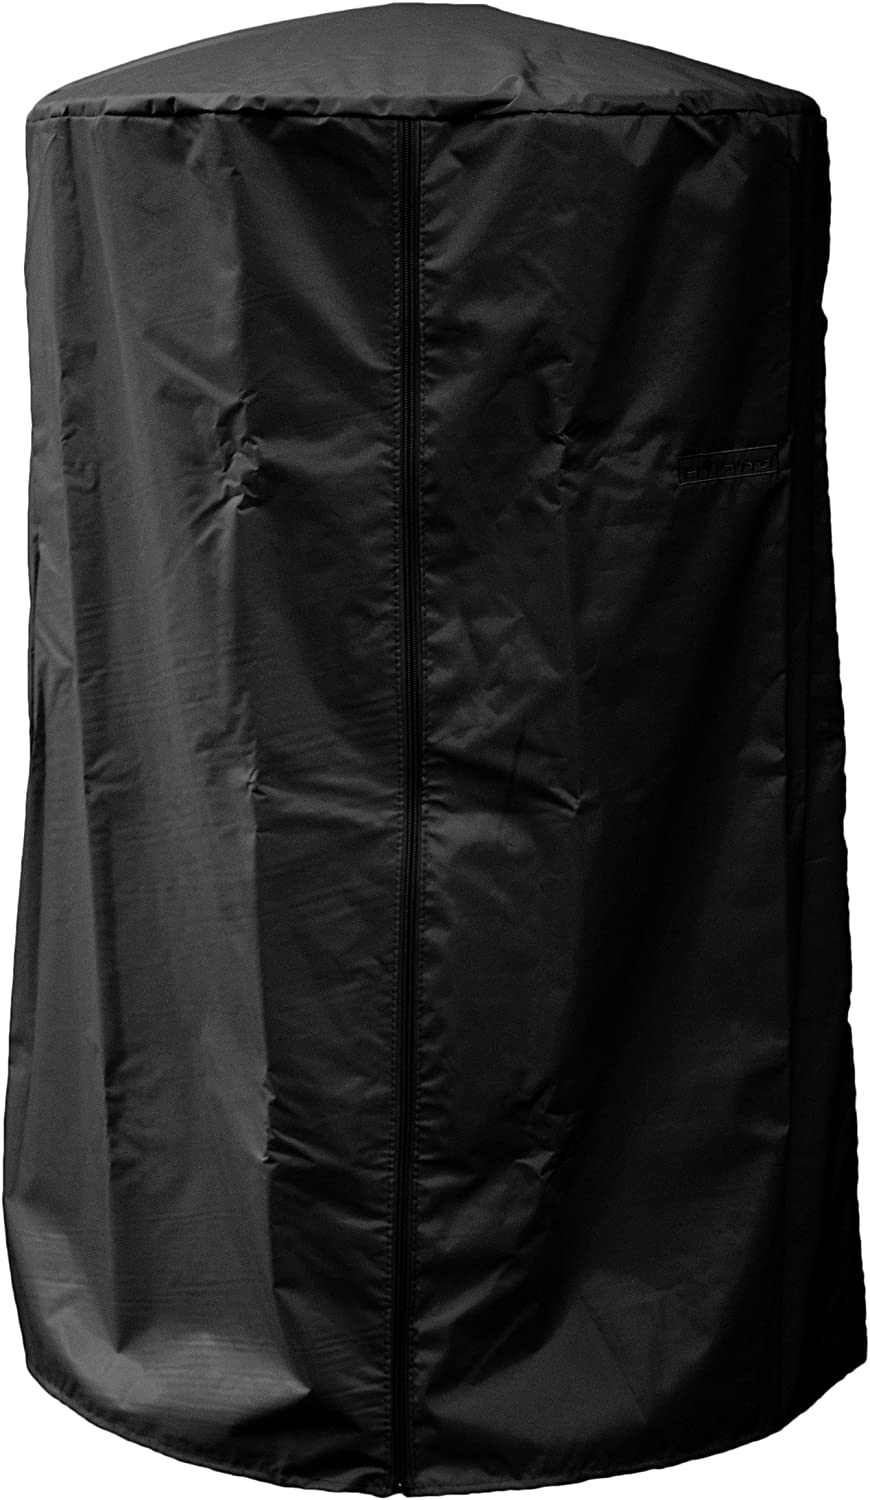 SUPOW Patio Heater Covers Waterproof with Zipper 420D Oxford Fabric Standup Outdoor Heater Cover for Outdoor Heaters 89 H x 33 D x 19 B 